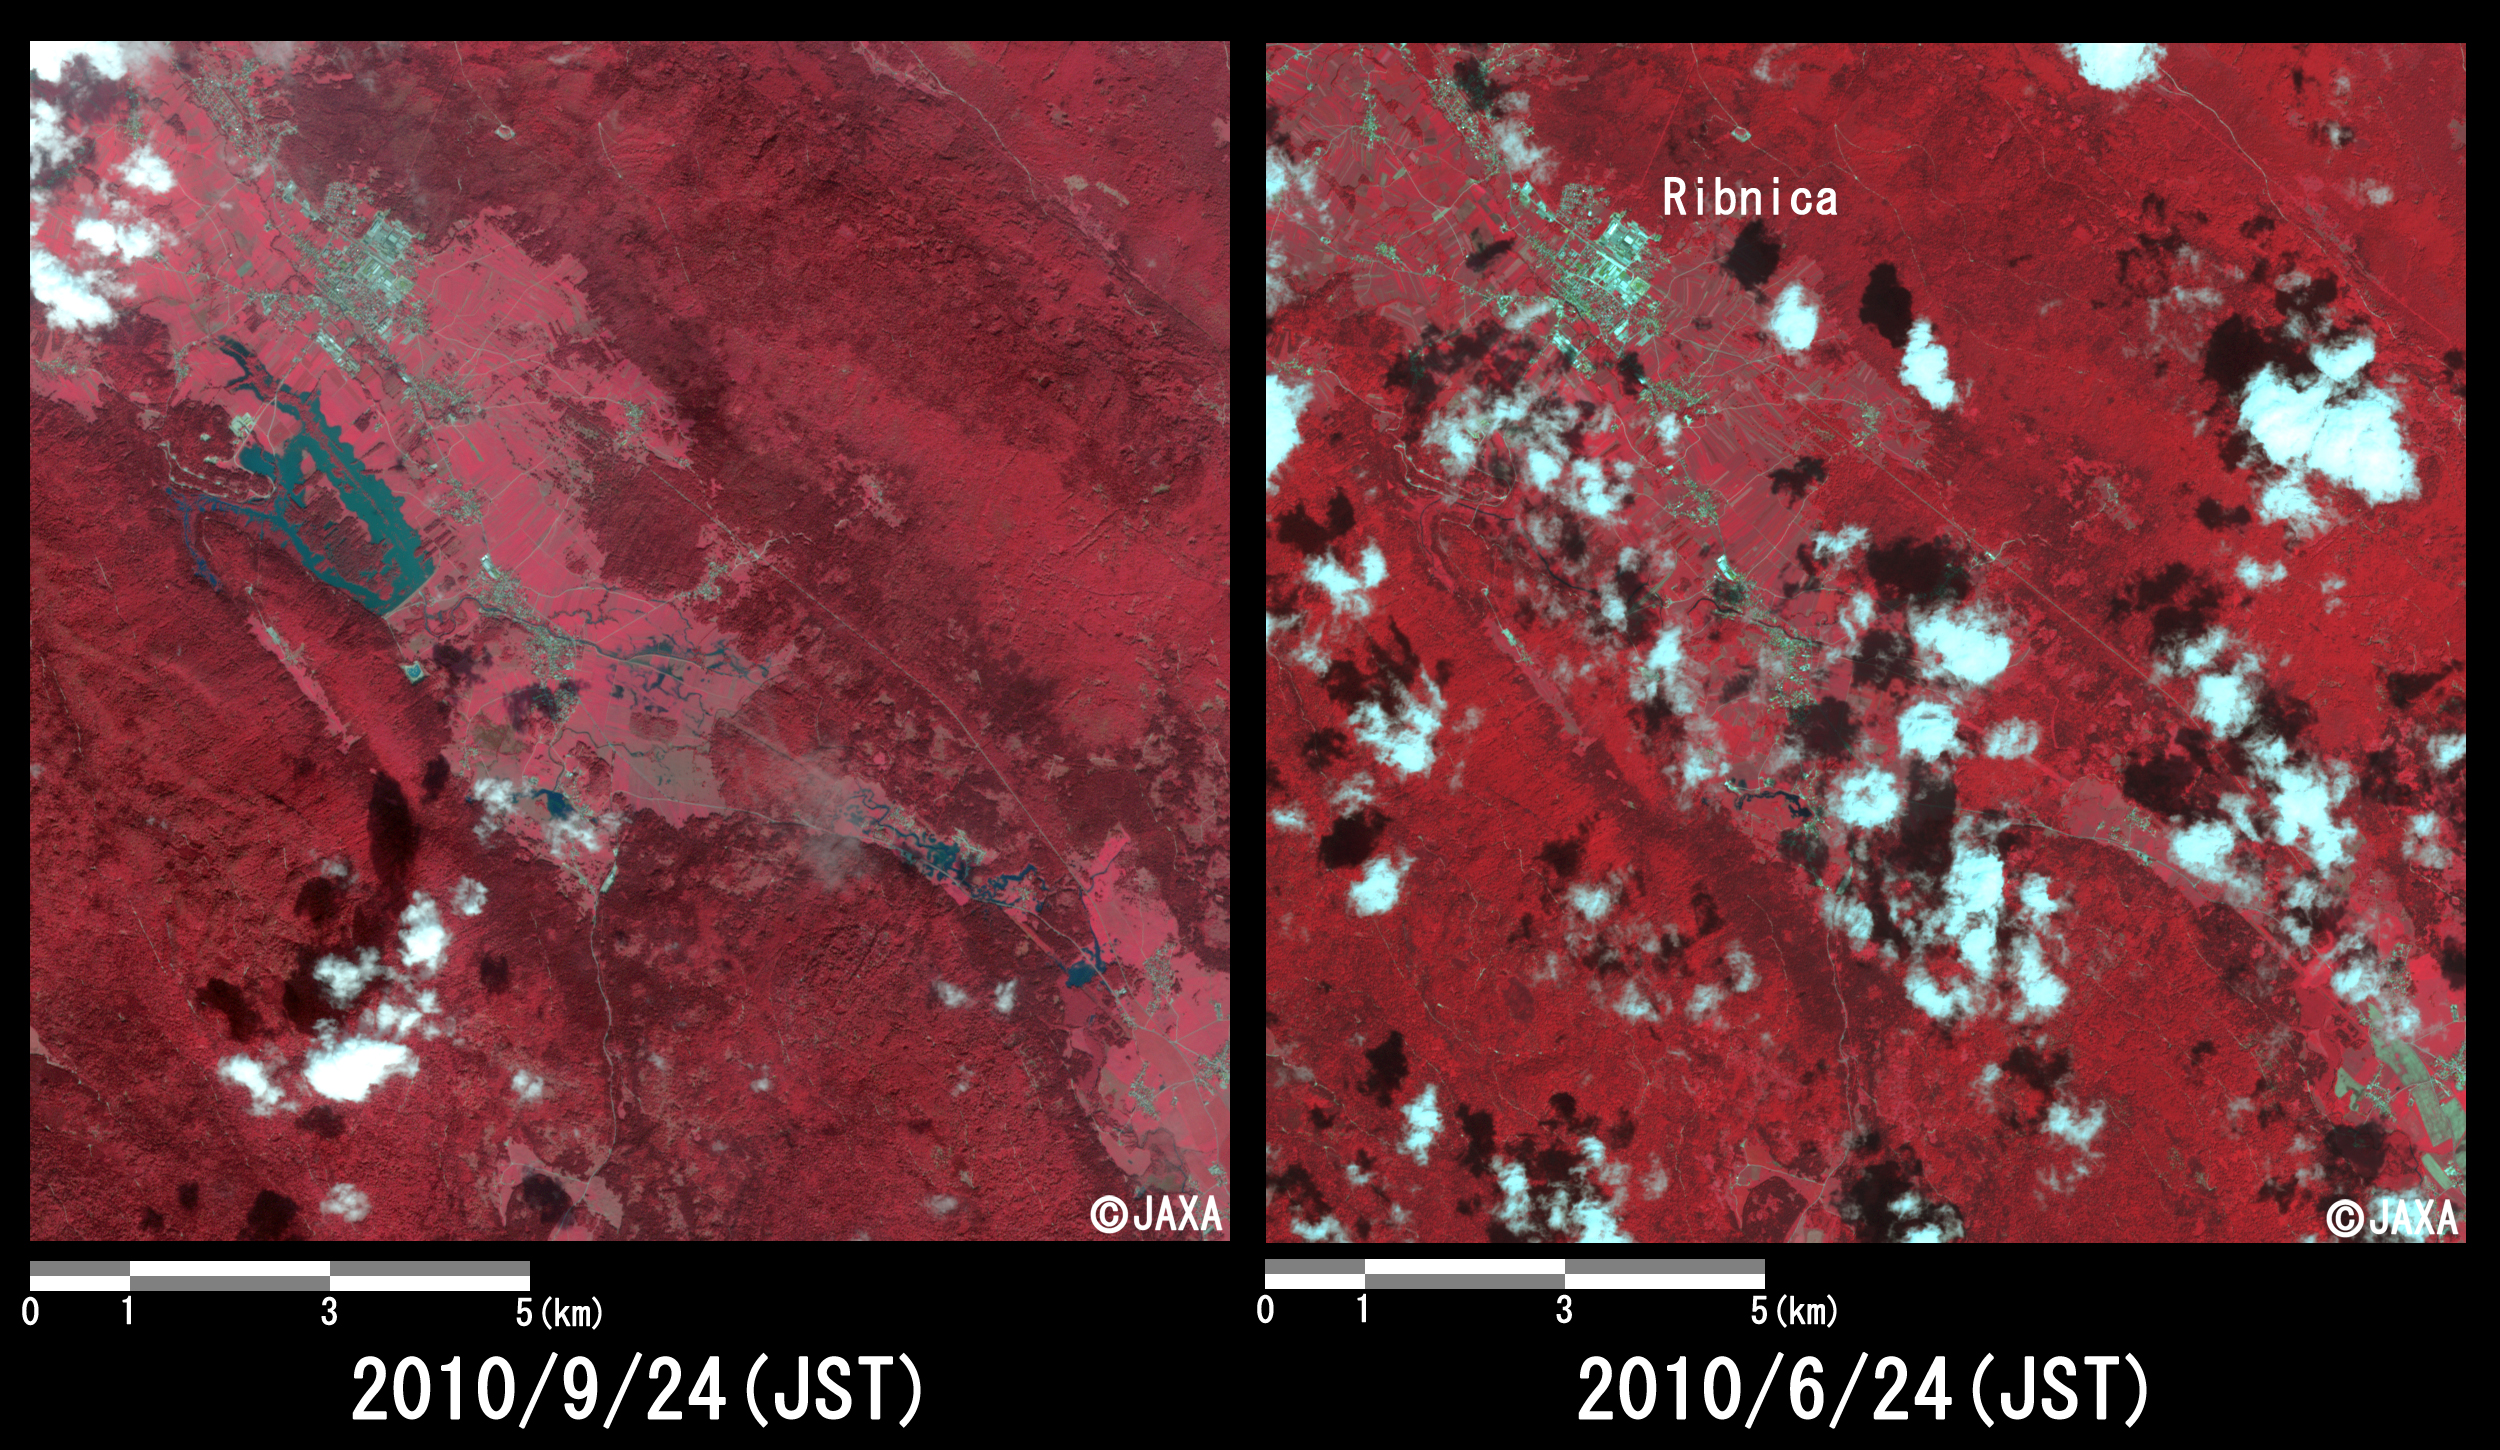 Fig. 4: Enlarged images of the freshet at Ribnica. (144 square kilometers, left: September 24, 2010; right: July 11, 2010).